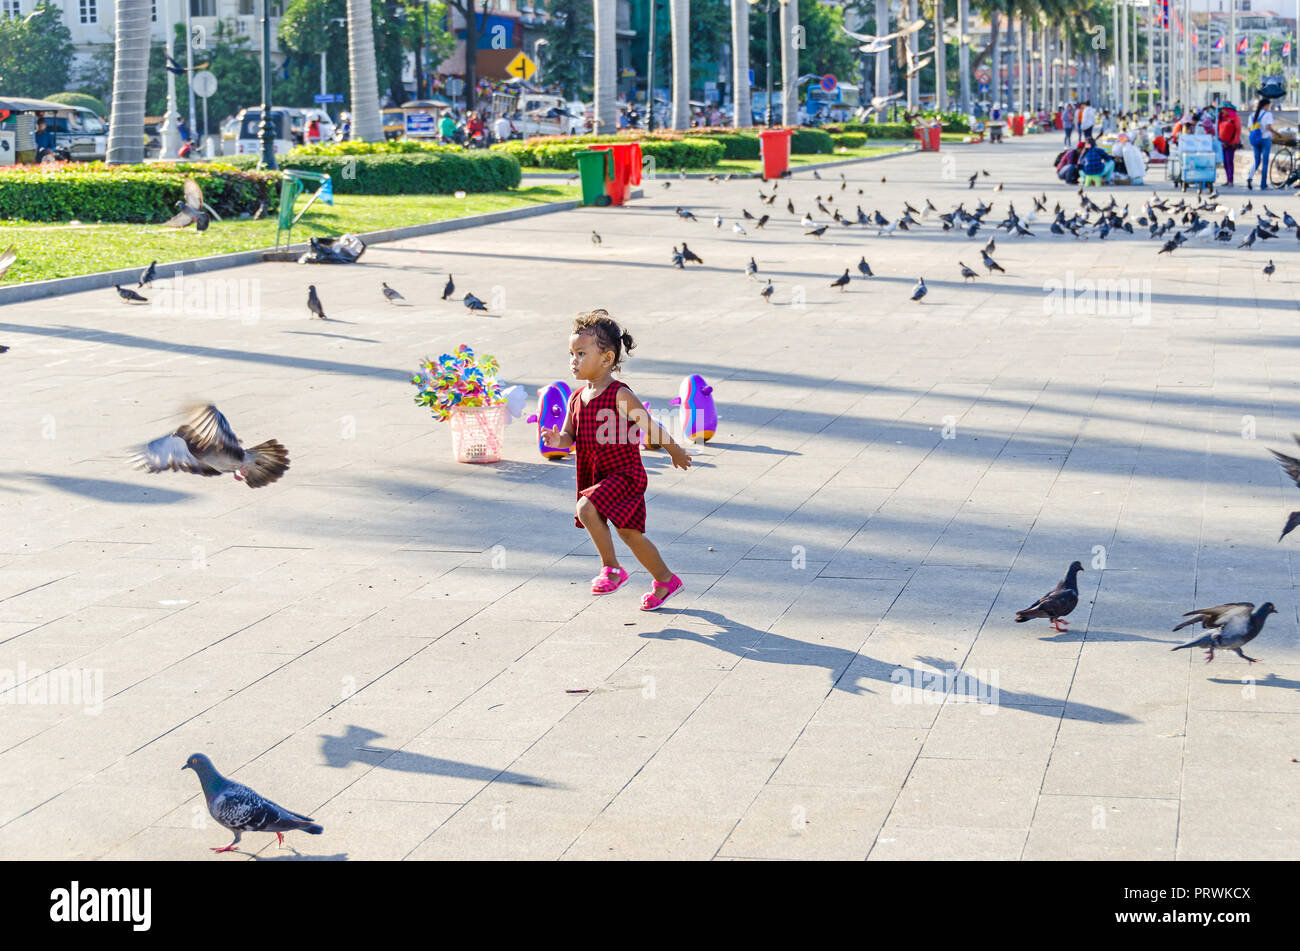 Phnom Penh, Cambodia - April 9, 2018: Preah Sisowath Quay, a riverside public promenade on the bank of the Tonle Sap River with its  large, long open  Stock Photo